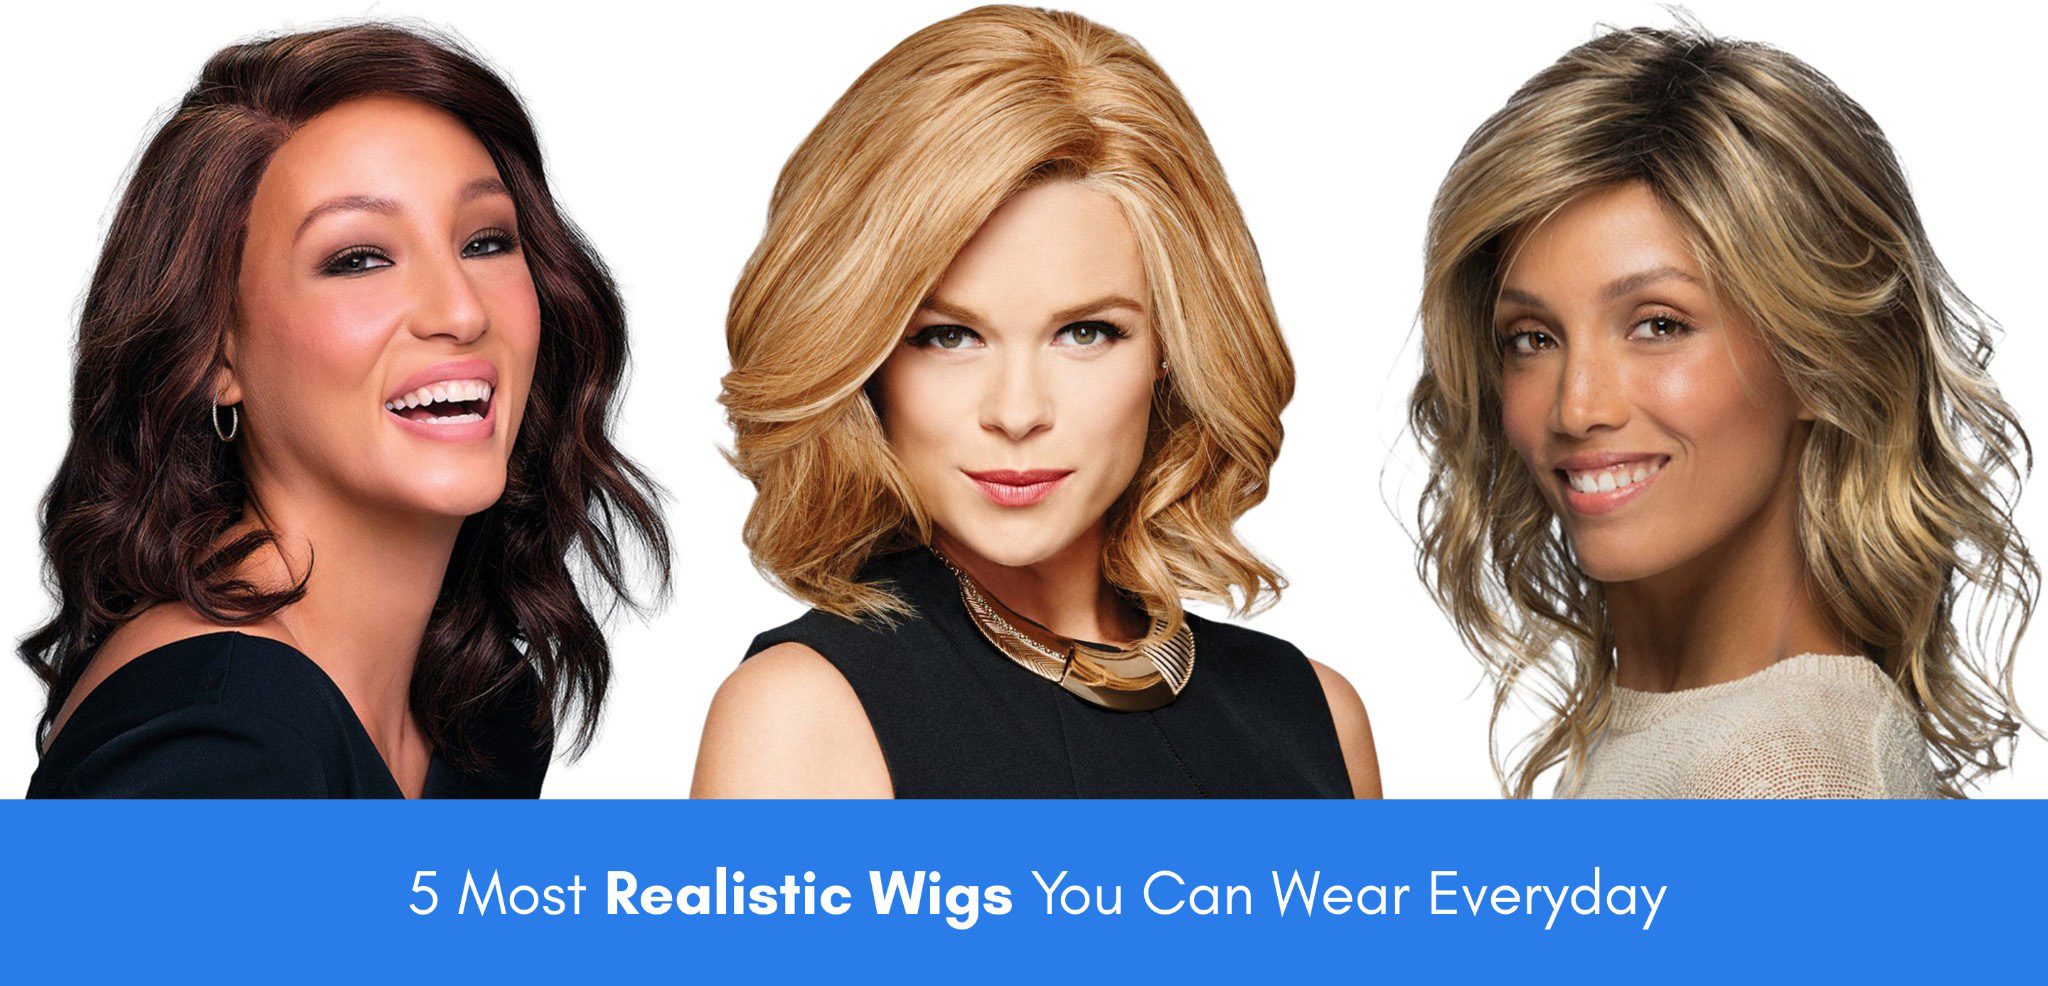 5 Most Realistic Wigs You Can Wear Everyday